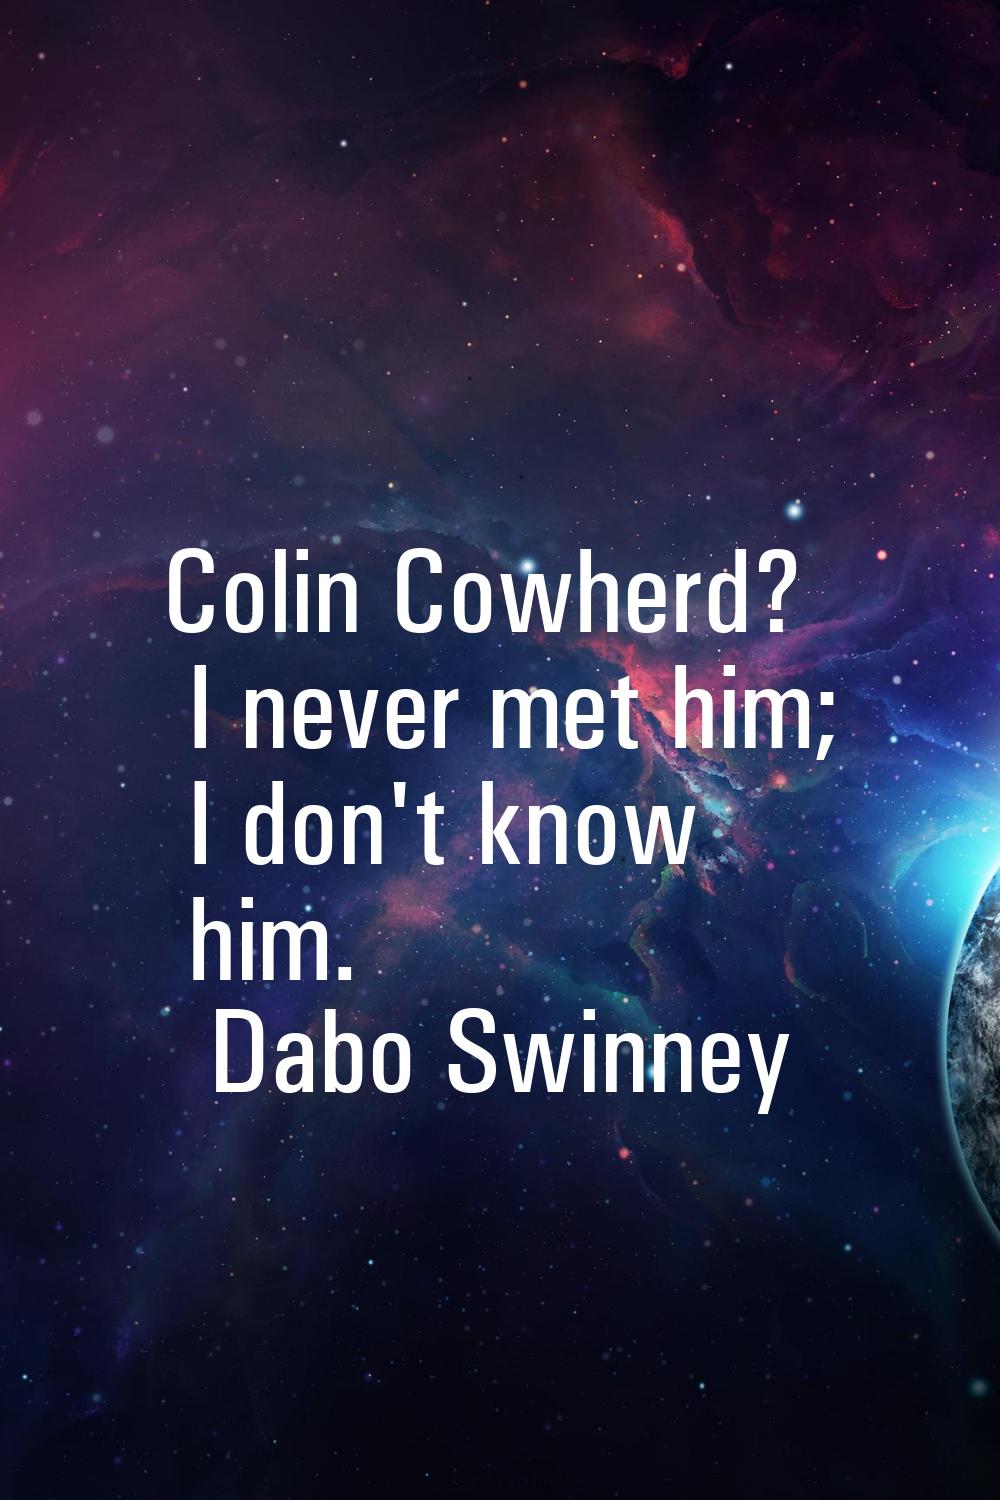 Colin Cowherd? I never met him; I don't know him.